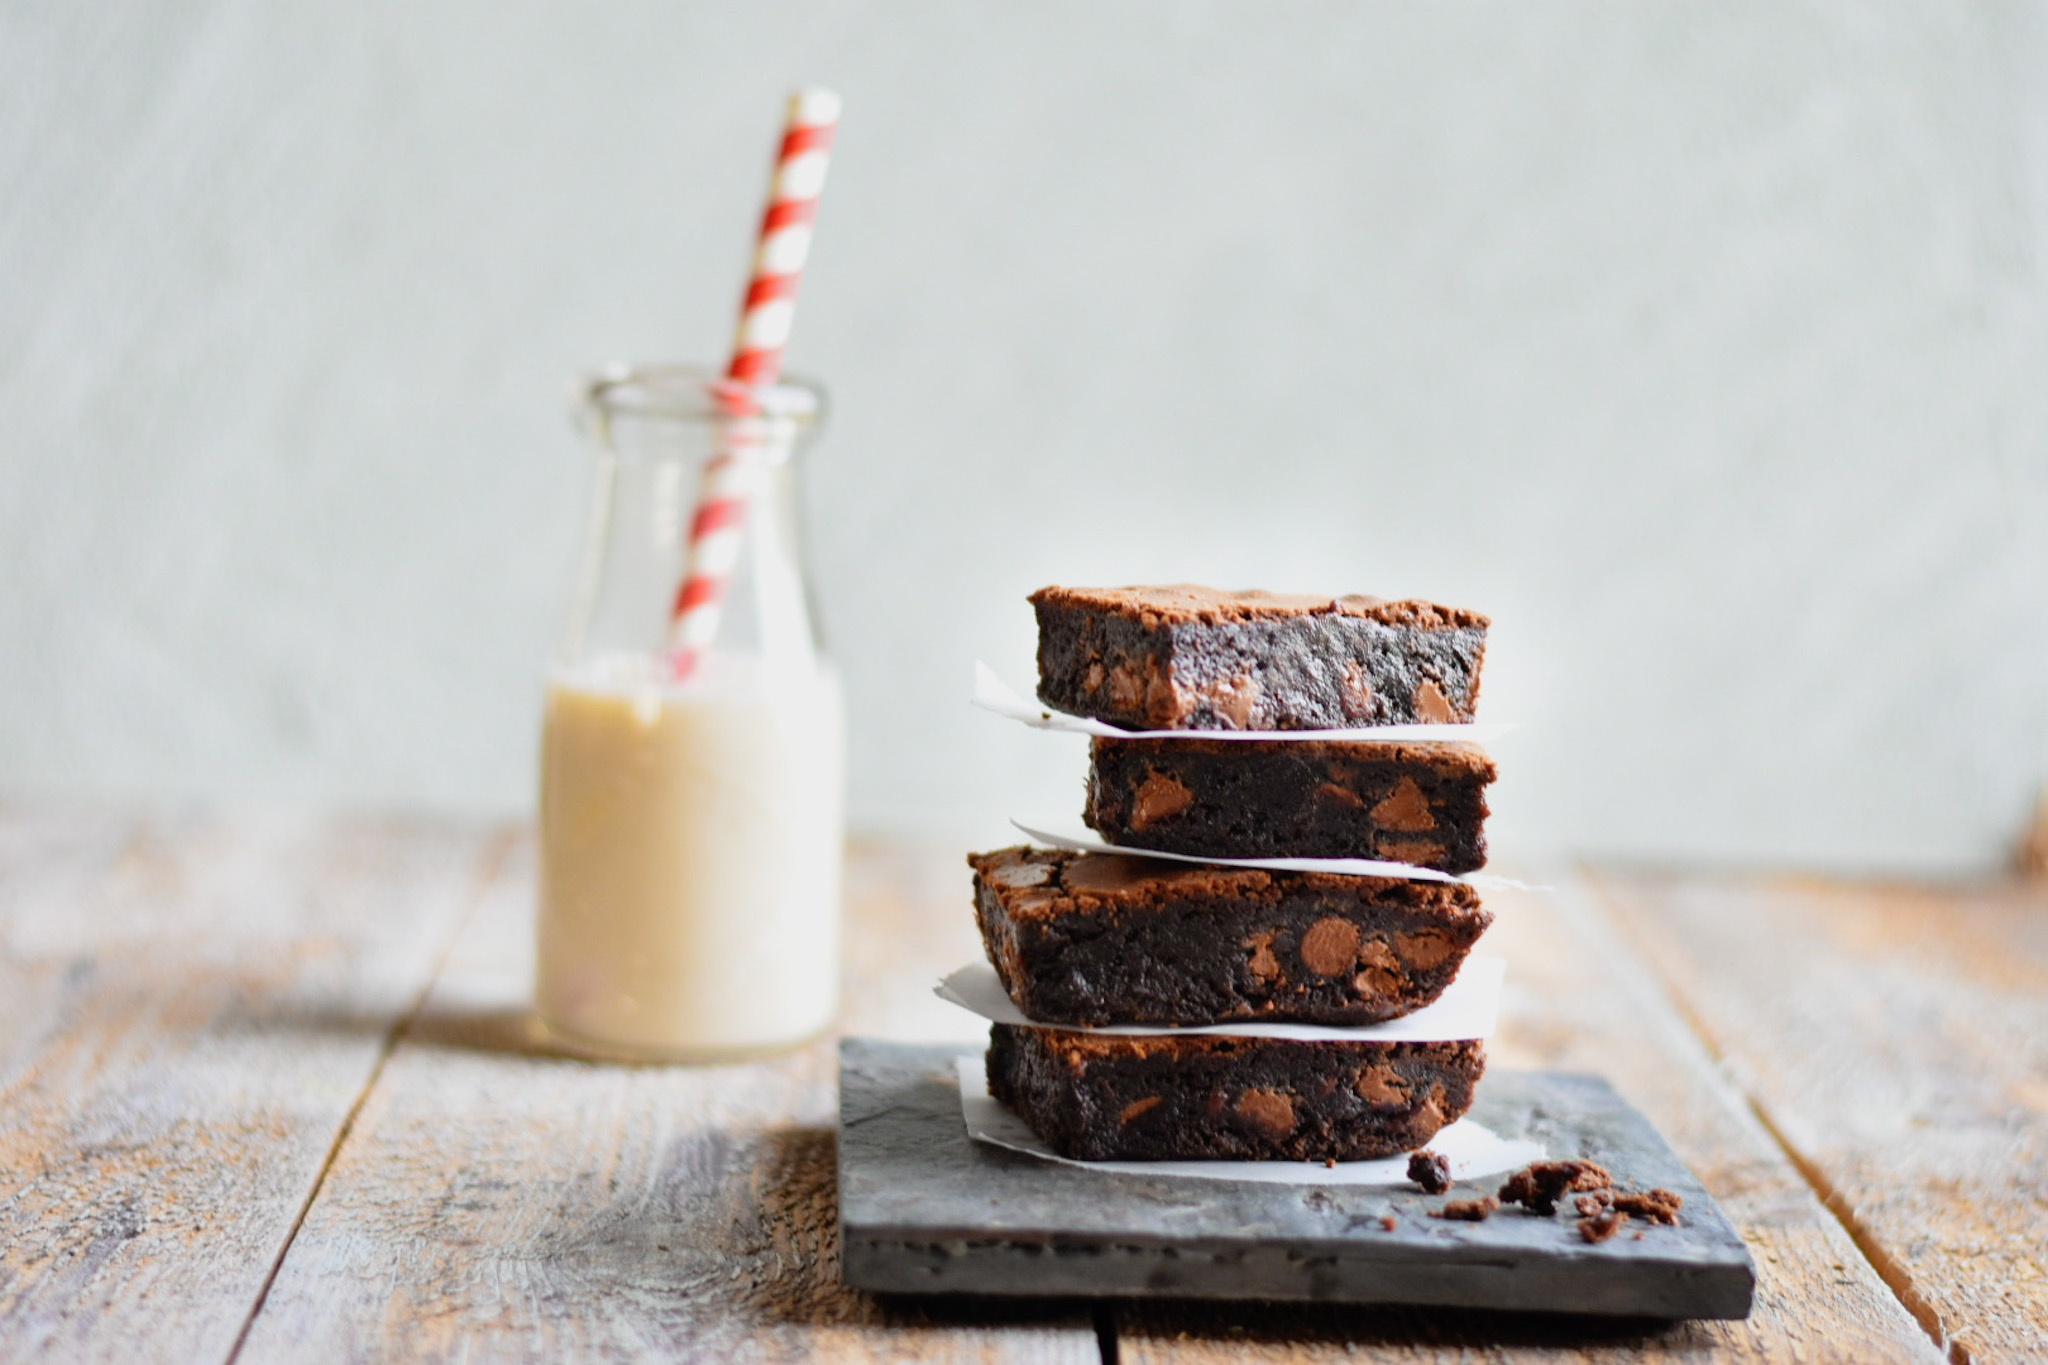 Stack of brownies with bottle of milk with red and white star